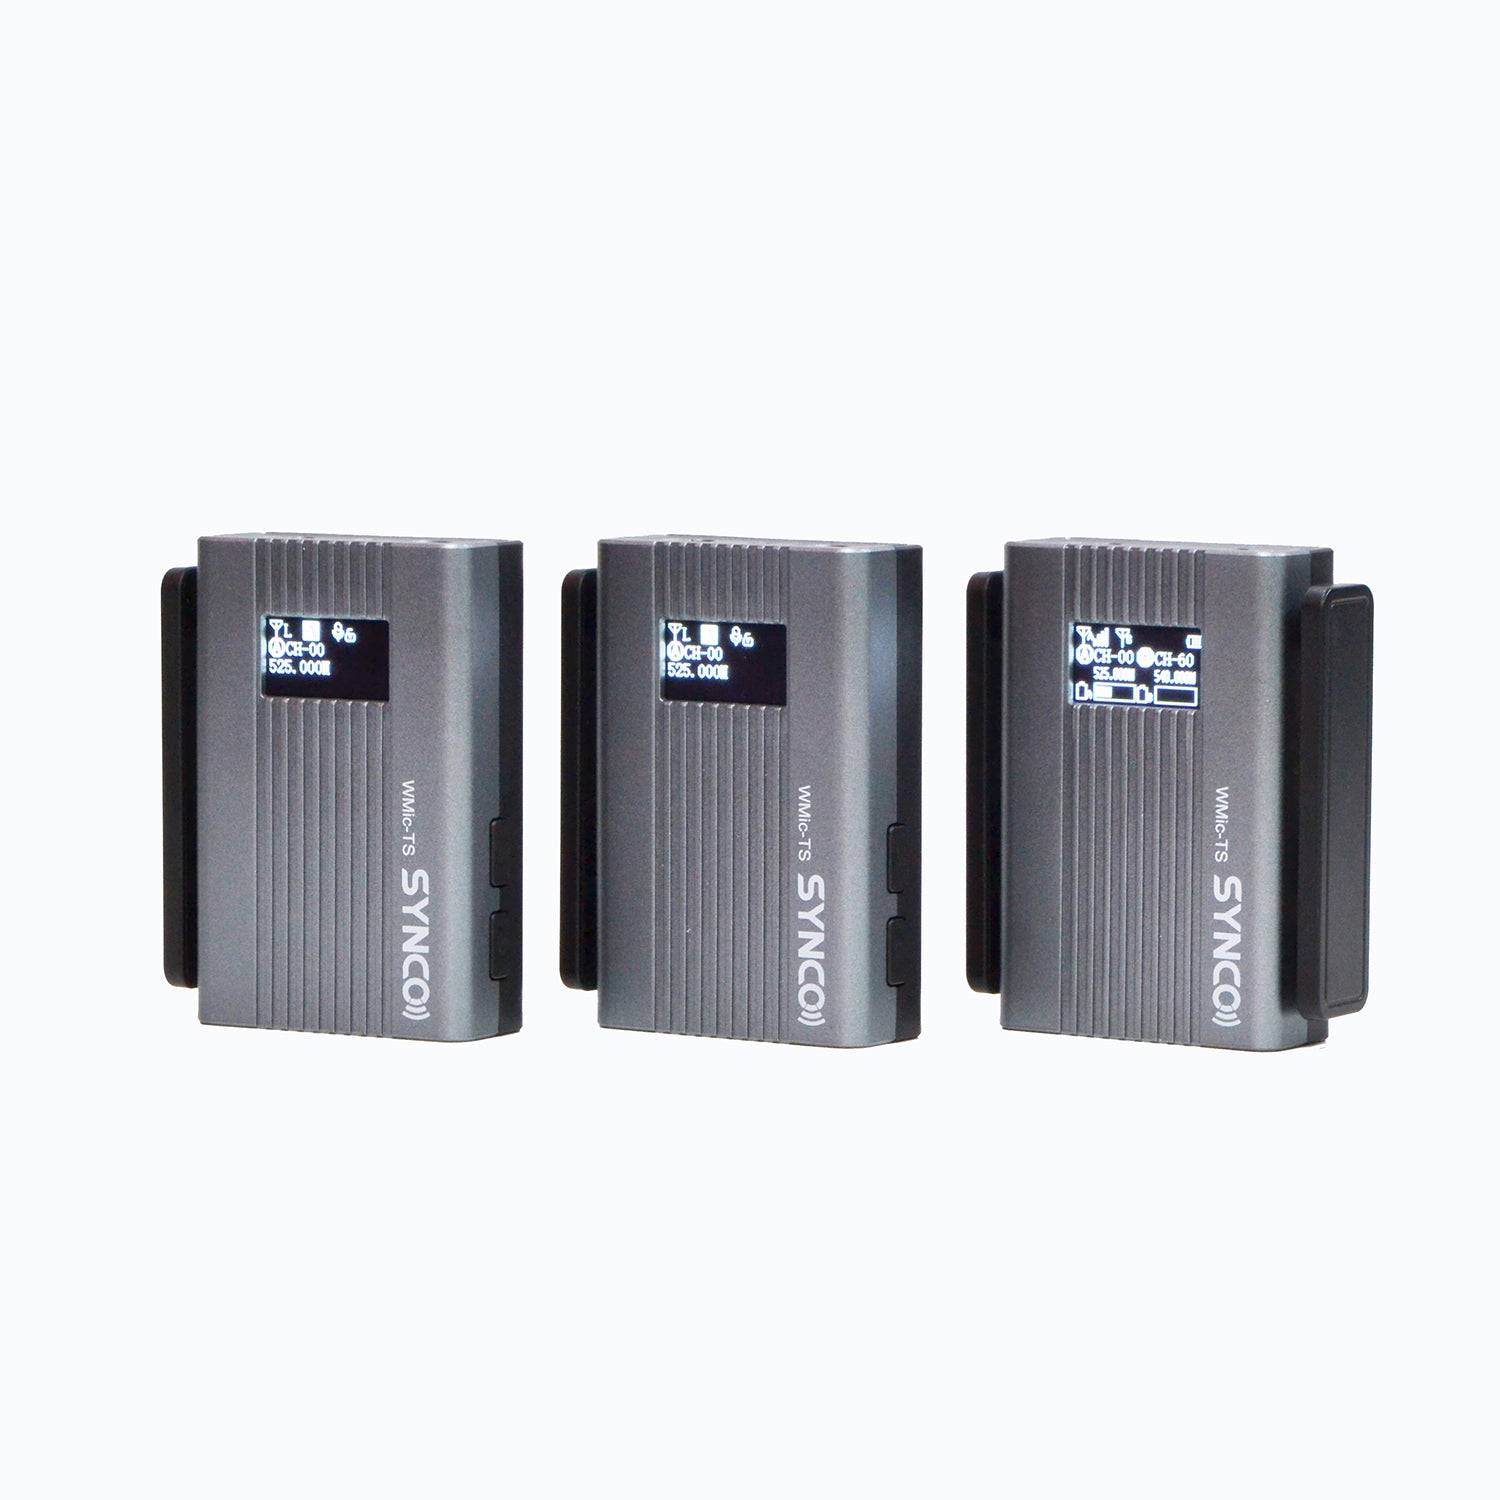 Synco WMic-TS Wireless Microphone System